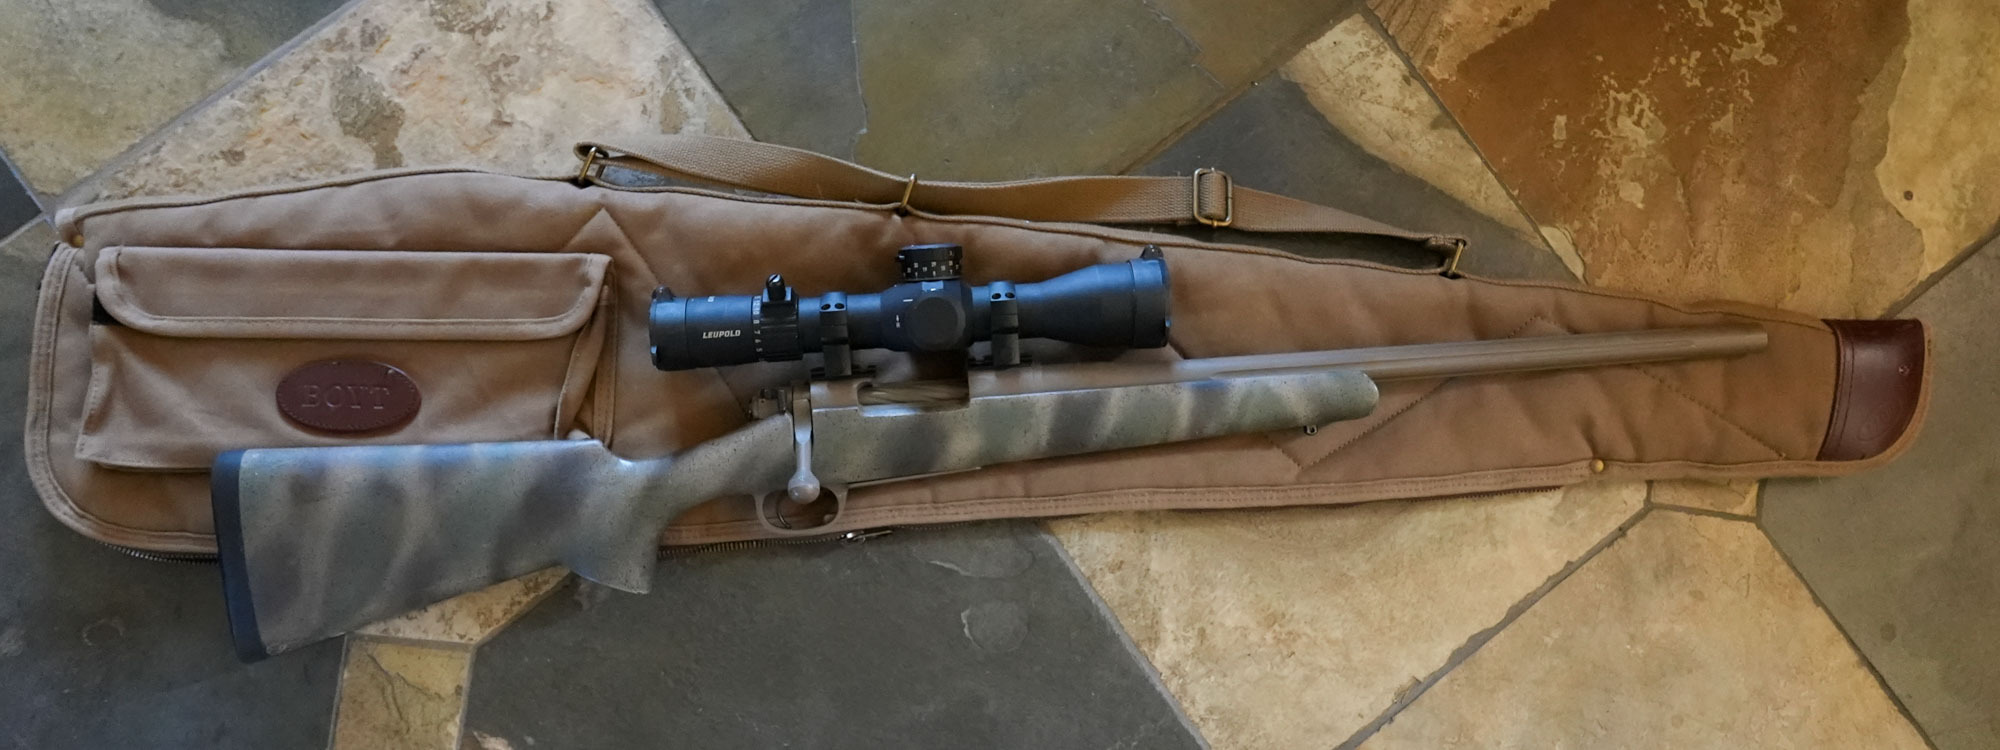 A rifle sits on the Boyt Signature Scoped Rifle Case.